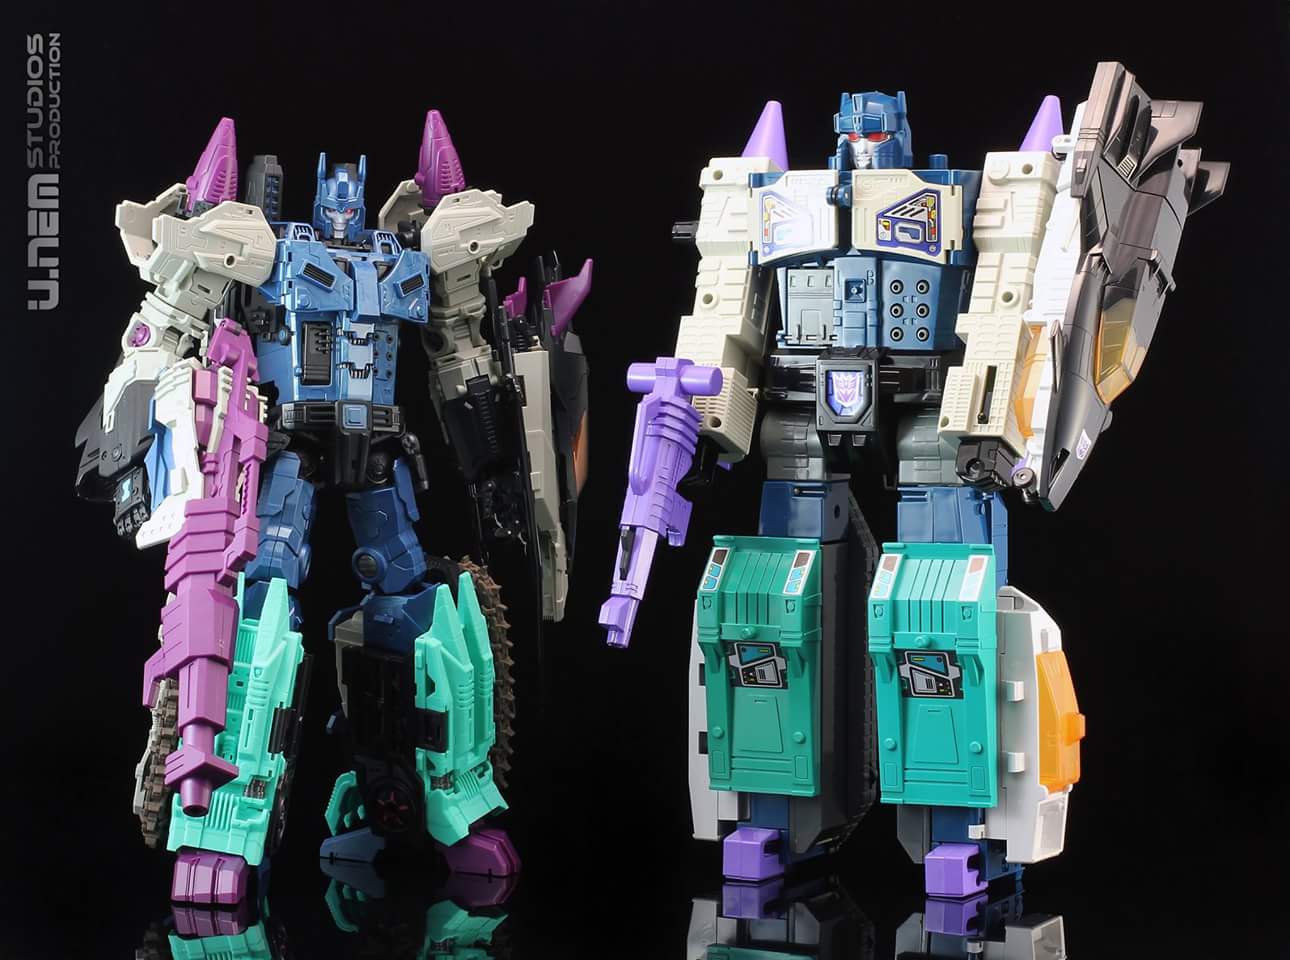 [Mastermind Creations] Produit Tiers - R-17 Carnifex - aka Overlord (TF Masterforce) - Page 2 OANzEuEu